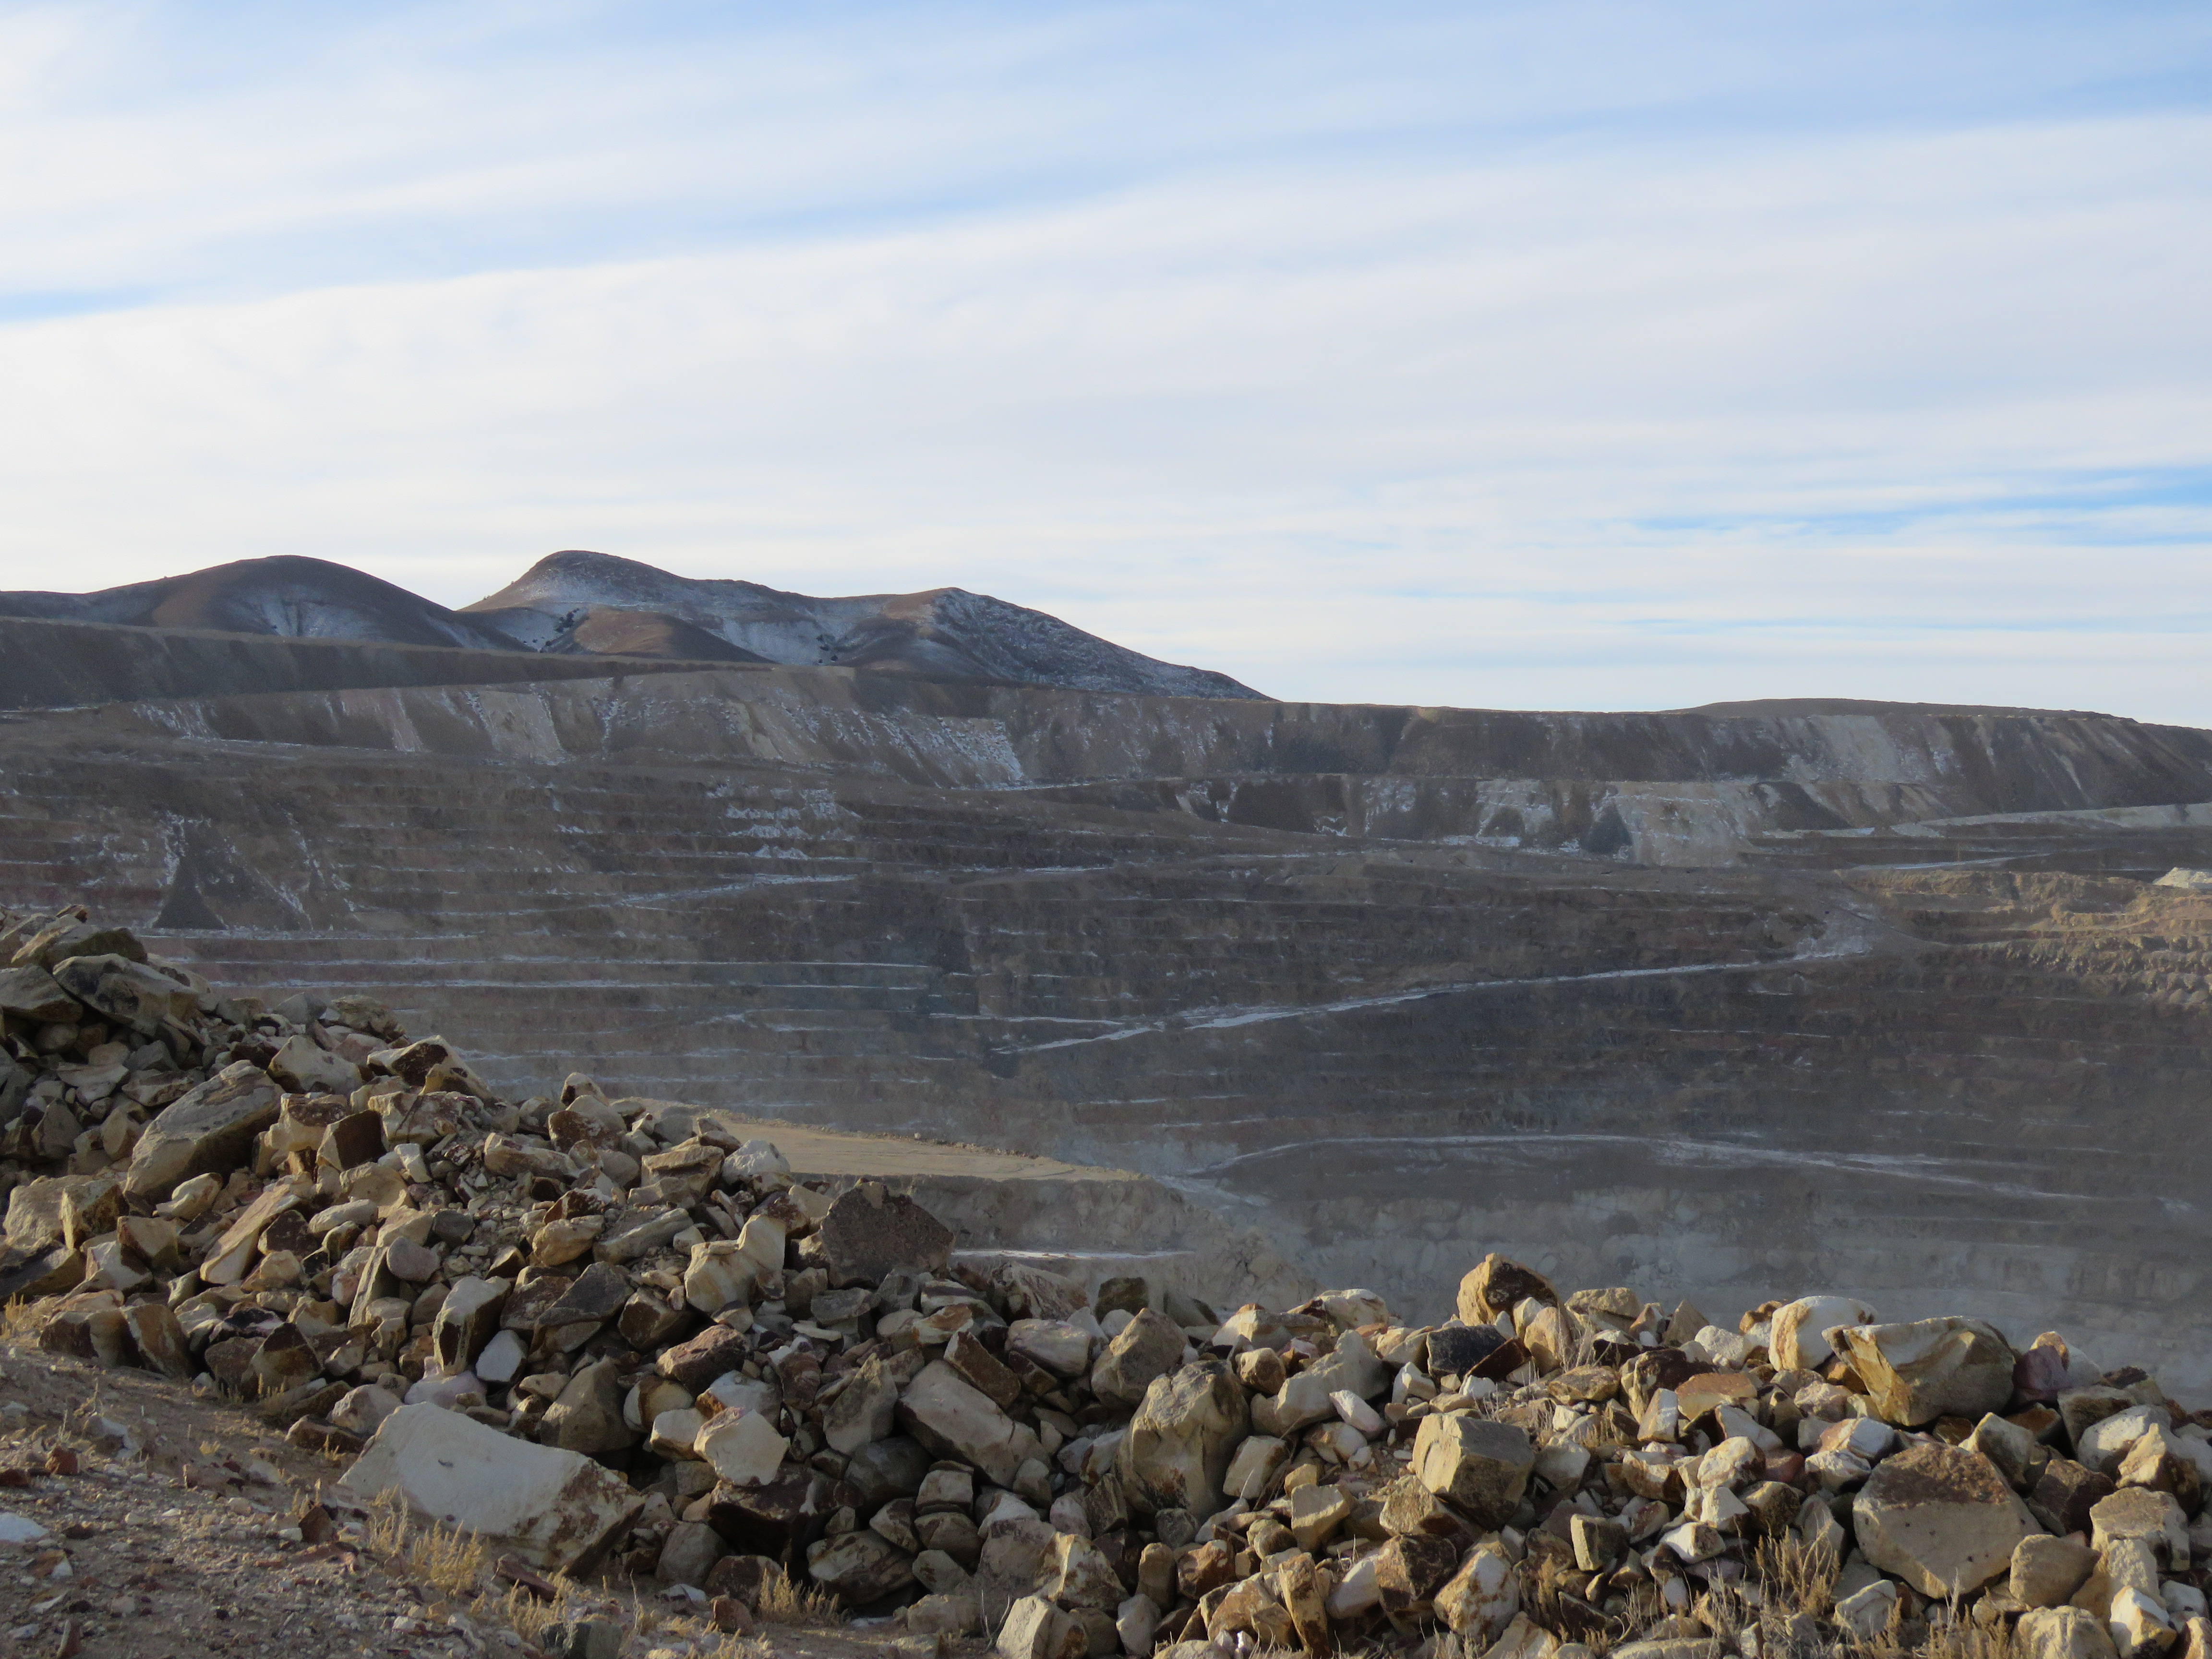 Round Mountain Gold Mine sits at 6,800 feet in elevation and is located 55 miles north of Tonopah, Nevada. Kinross Gold Corporation, a Toronto-based mining company, acquired full ownership of the mine from Barrick Gold Corporation in 2016.